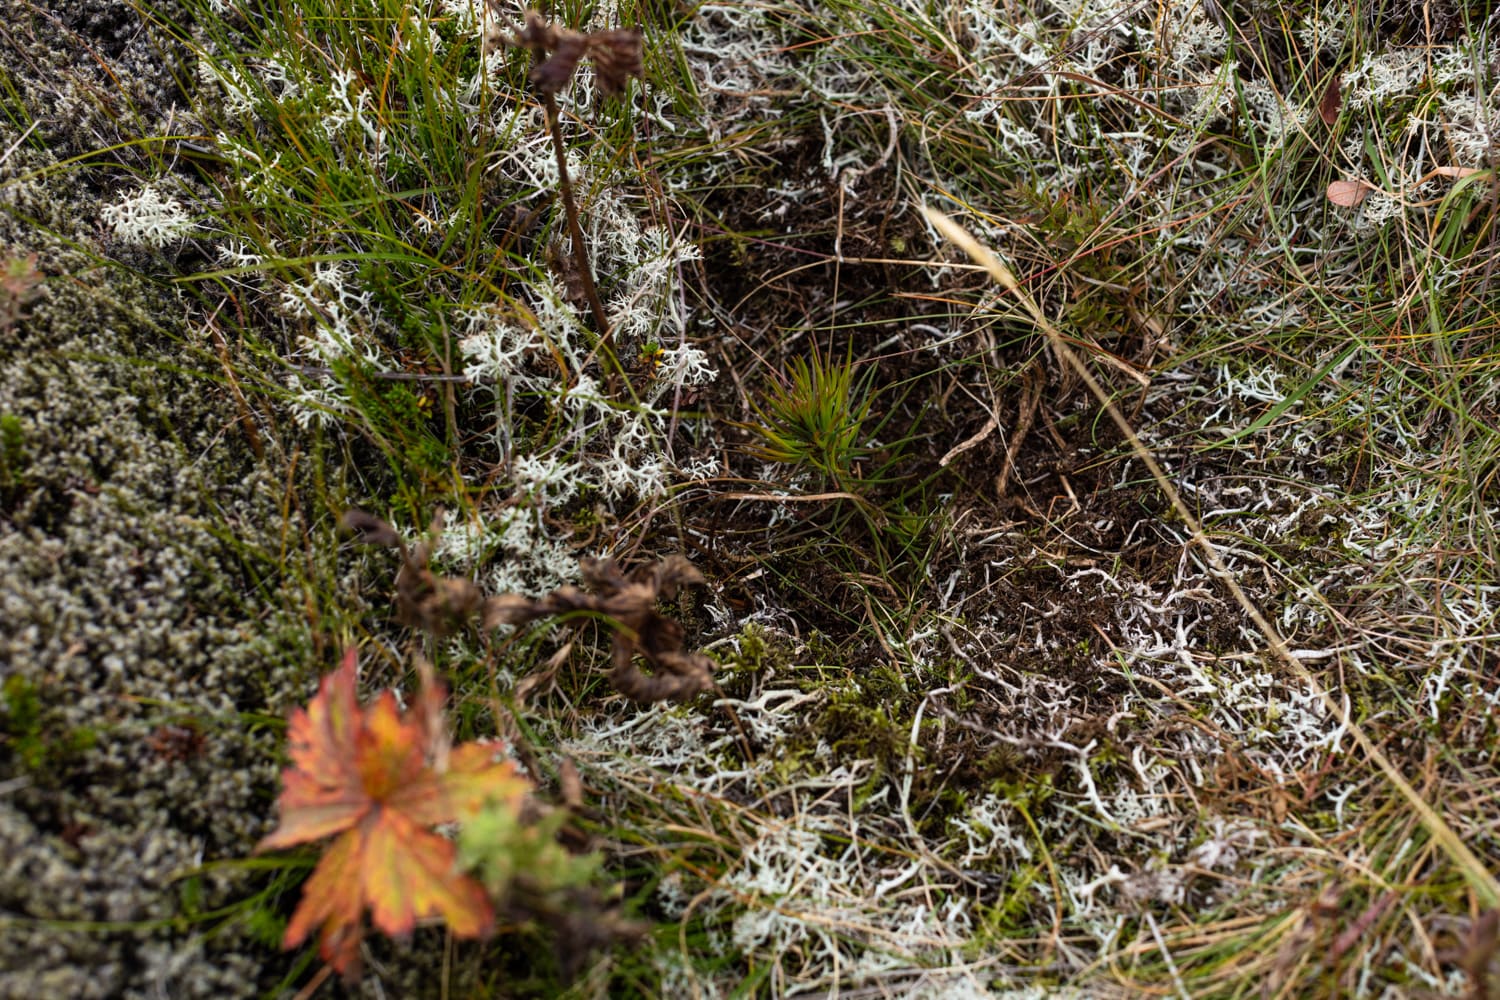 An up close image of the Icelandic landscape with moss and grass pictured and a small tree sprig sprouting out